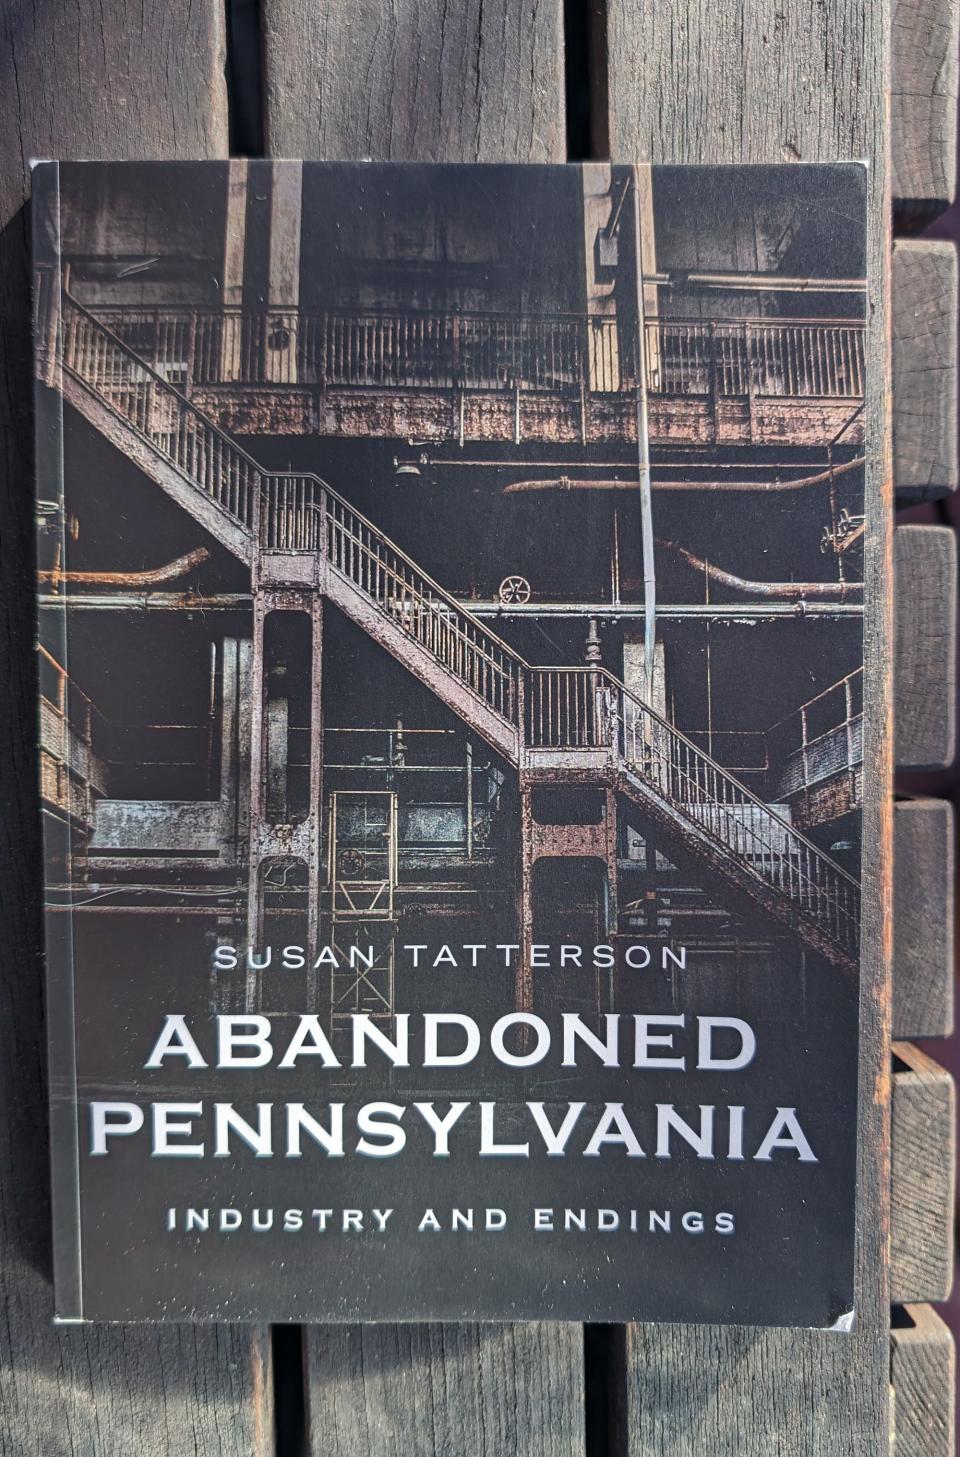 Abandoned Pennsylvania, a book by Susan Tatterson, includes the old York County prison.